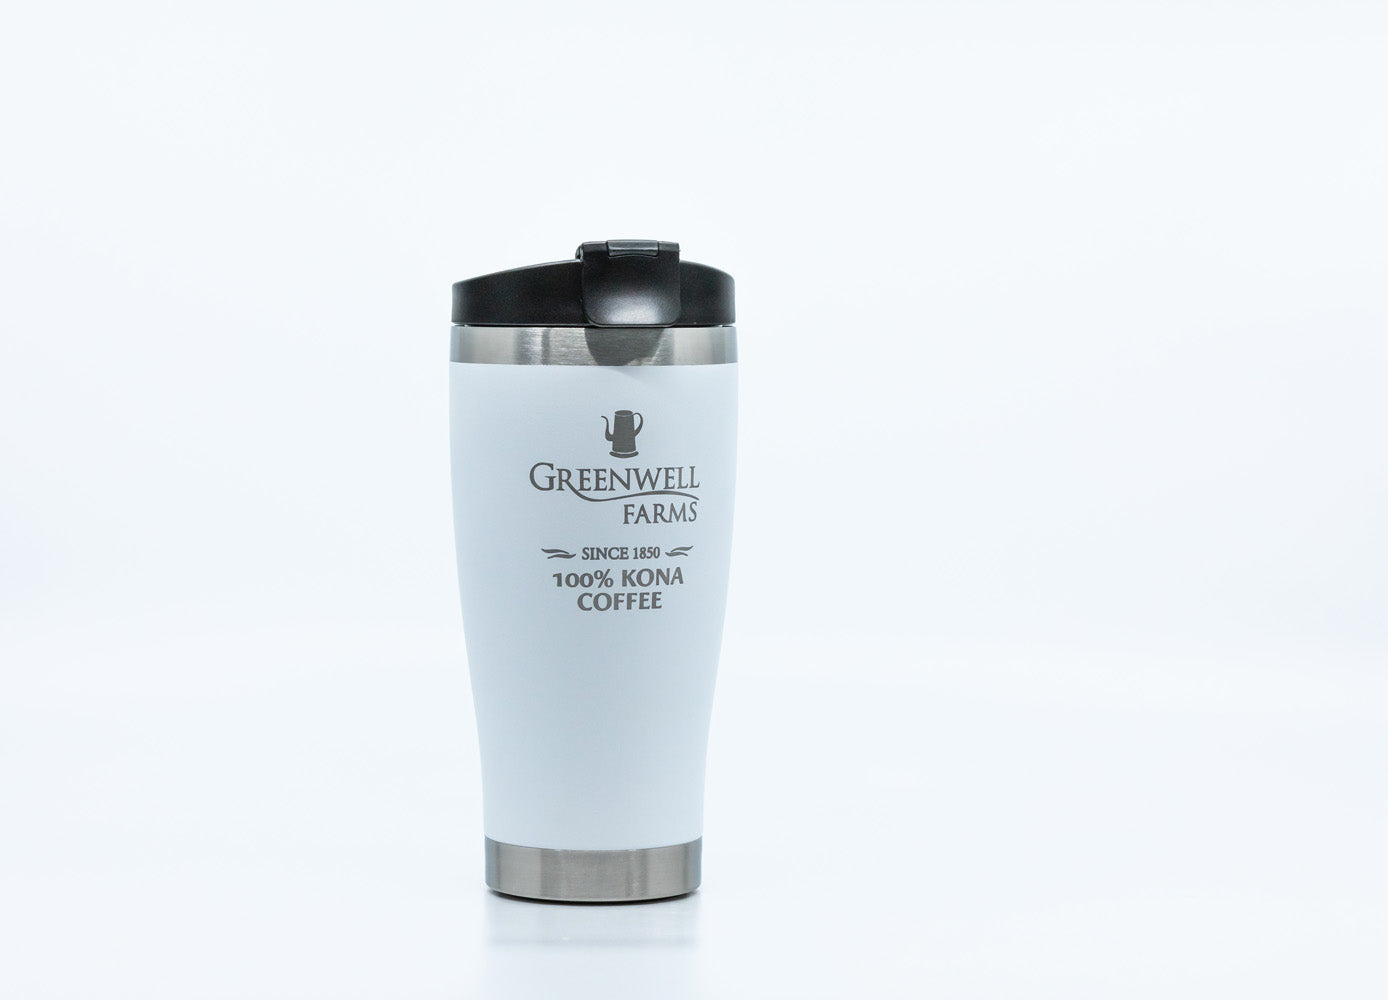 White Stainless Steel Travel Mug of Greenwell Farms